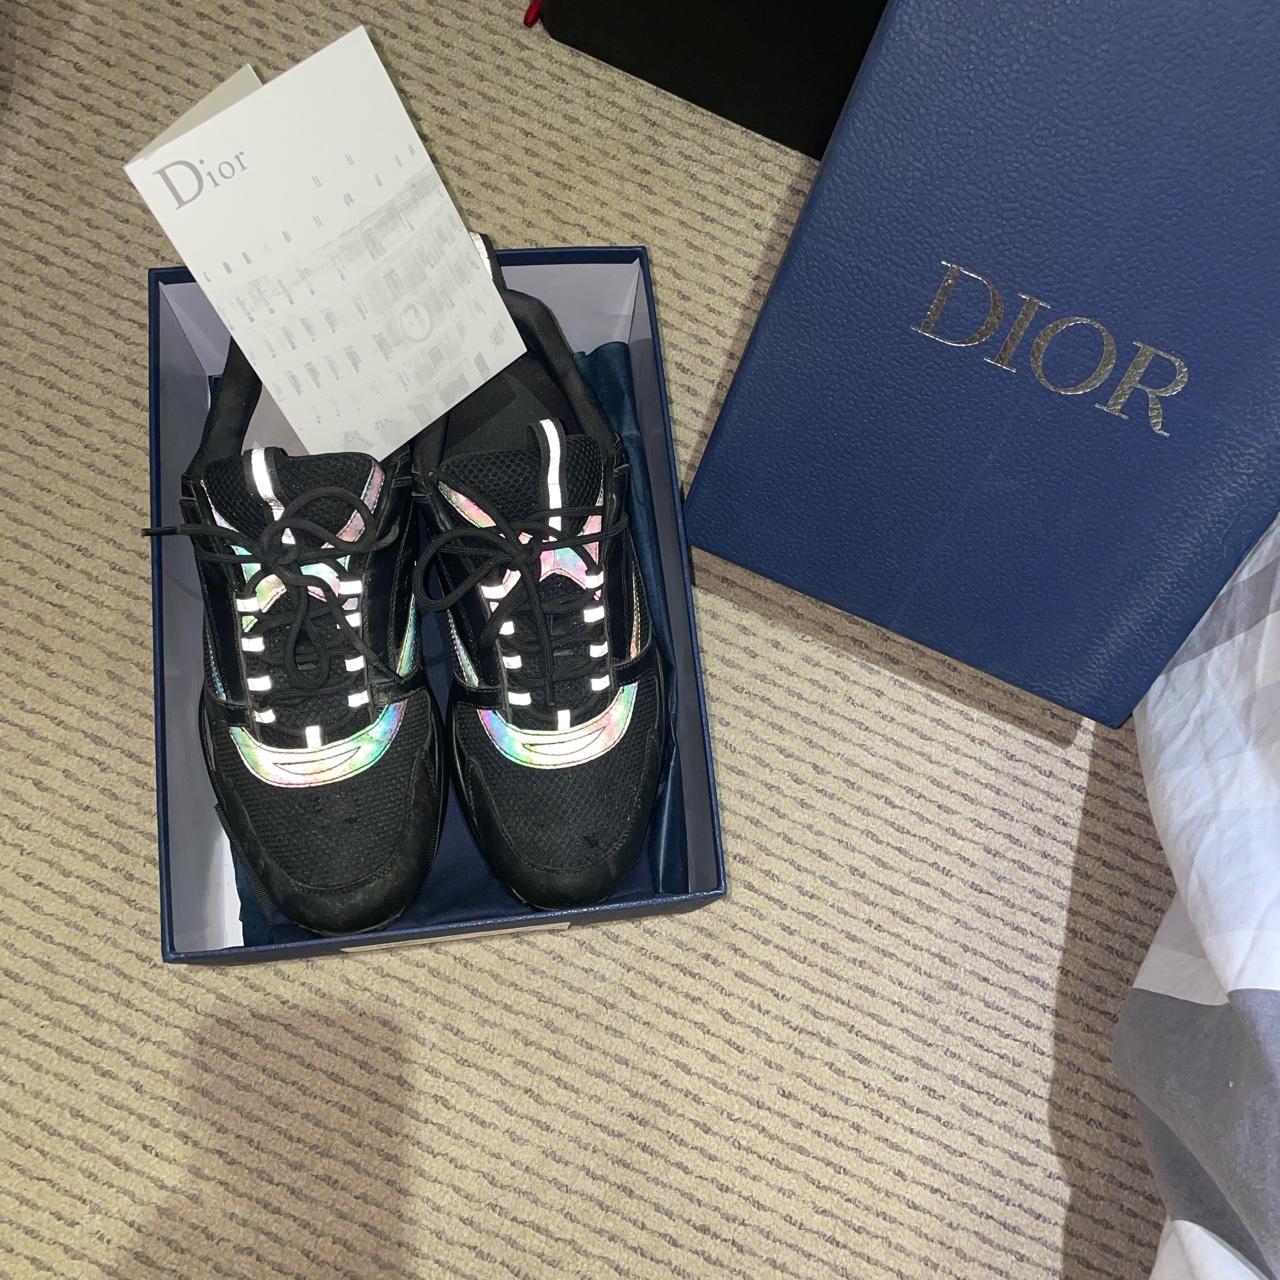 Dior b22s very worn condition 5/10 could definitely... - Depop